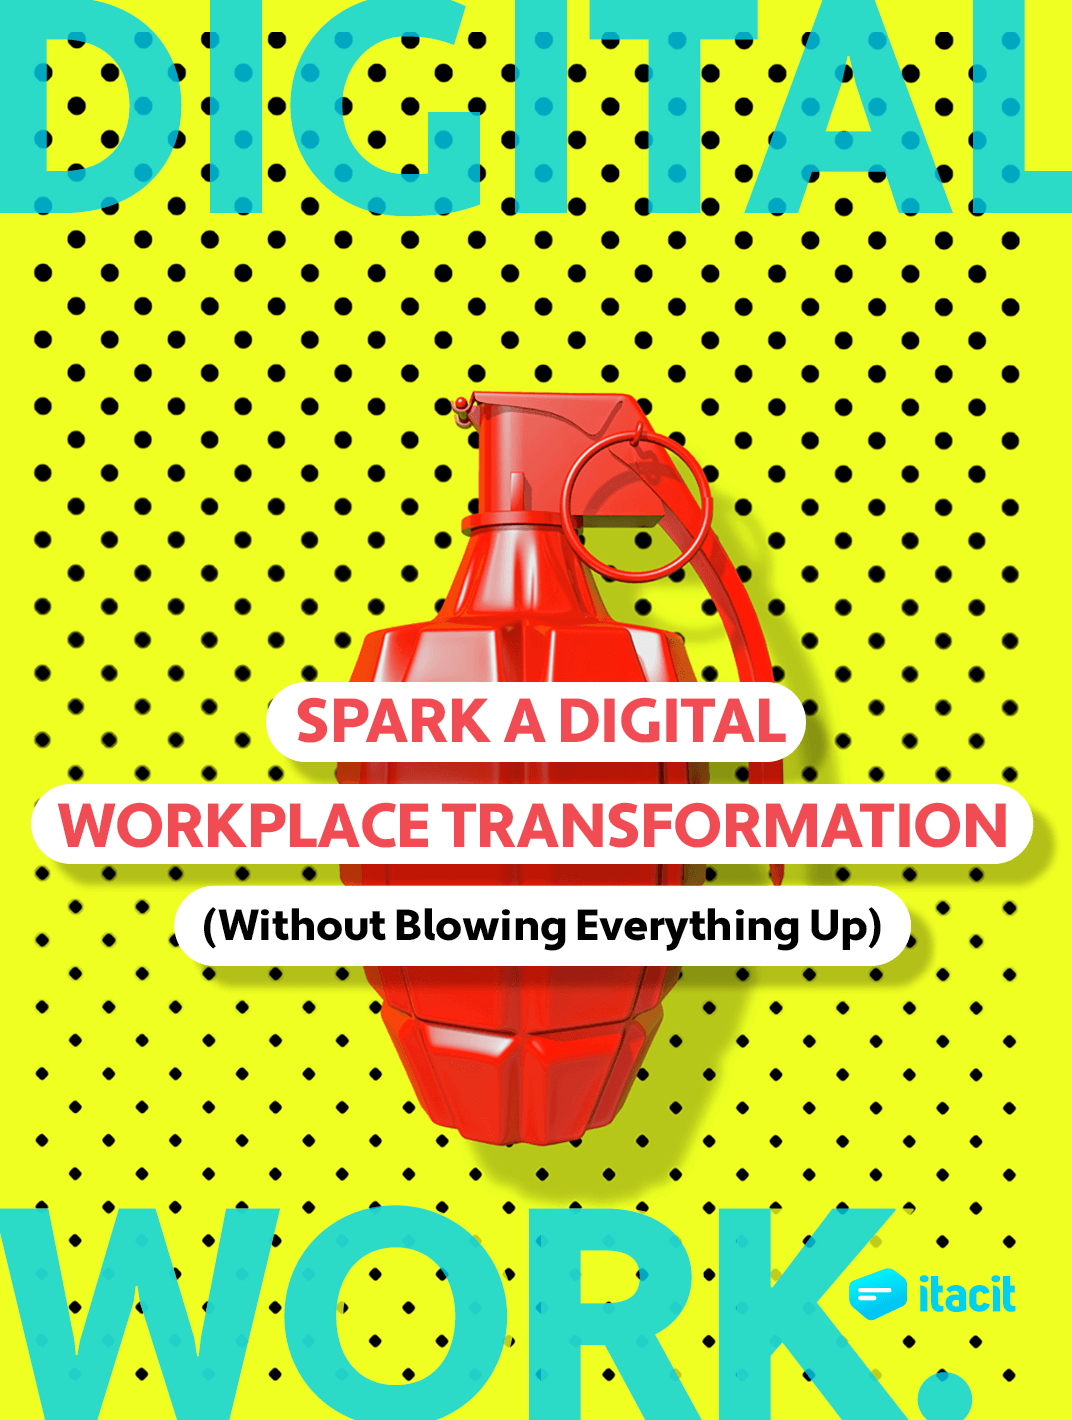 eBook Release: Spark A Digital Workplace Transformation (Without Blowing Everything Up)